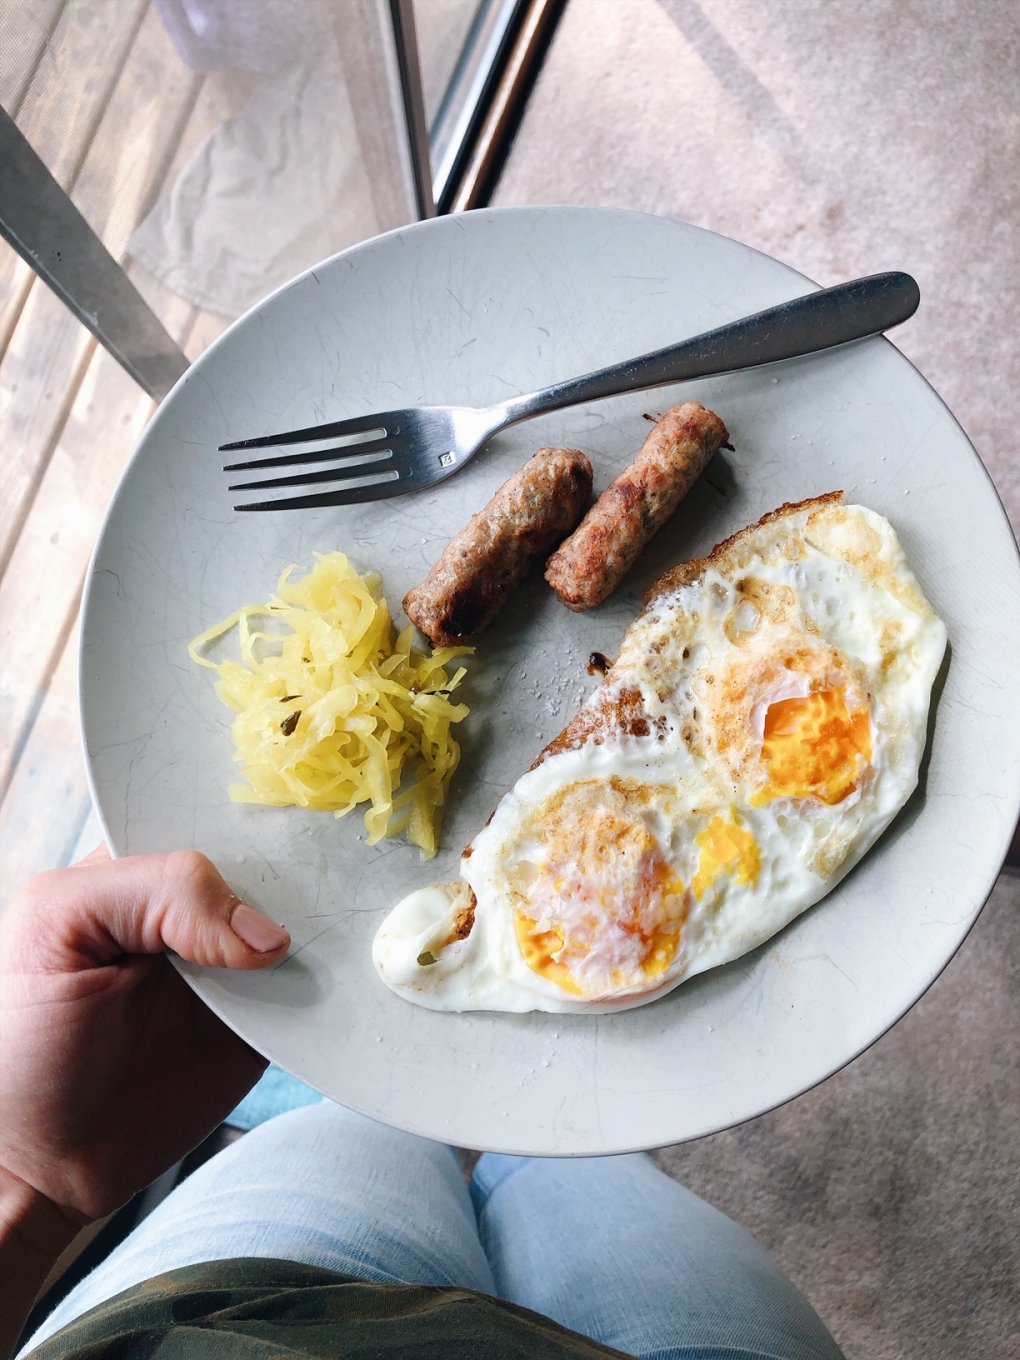 Two fried eggs with sausage and sauerkraut on a plate being held next to a window